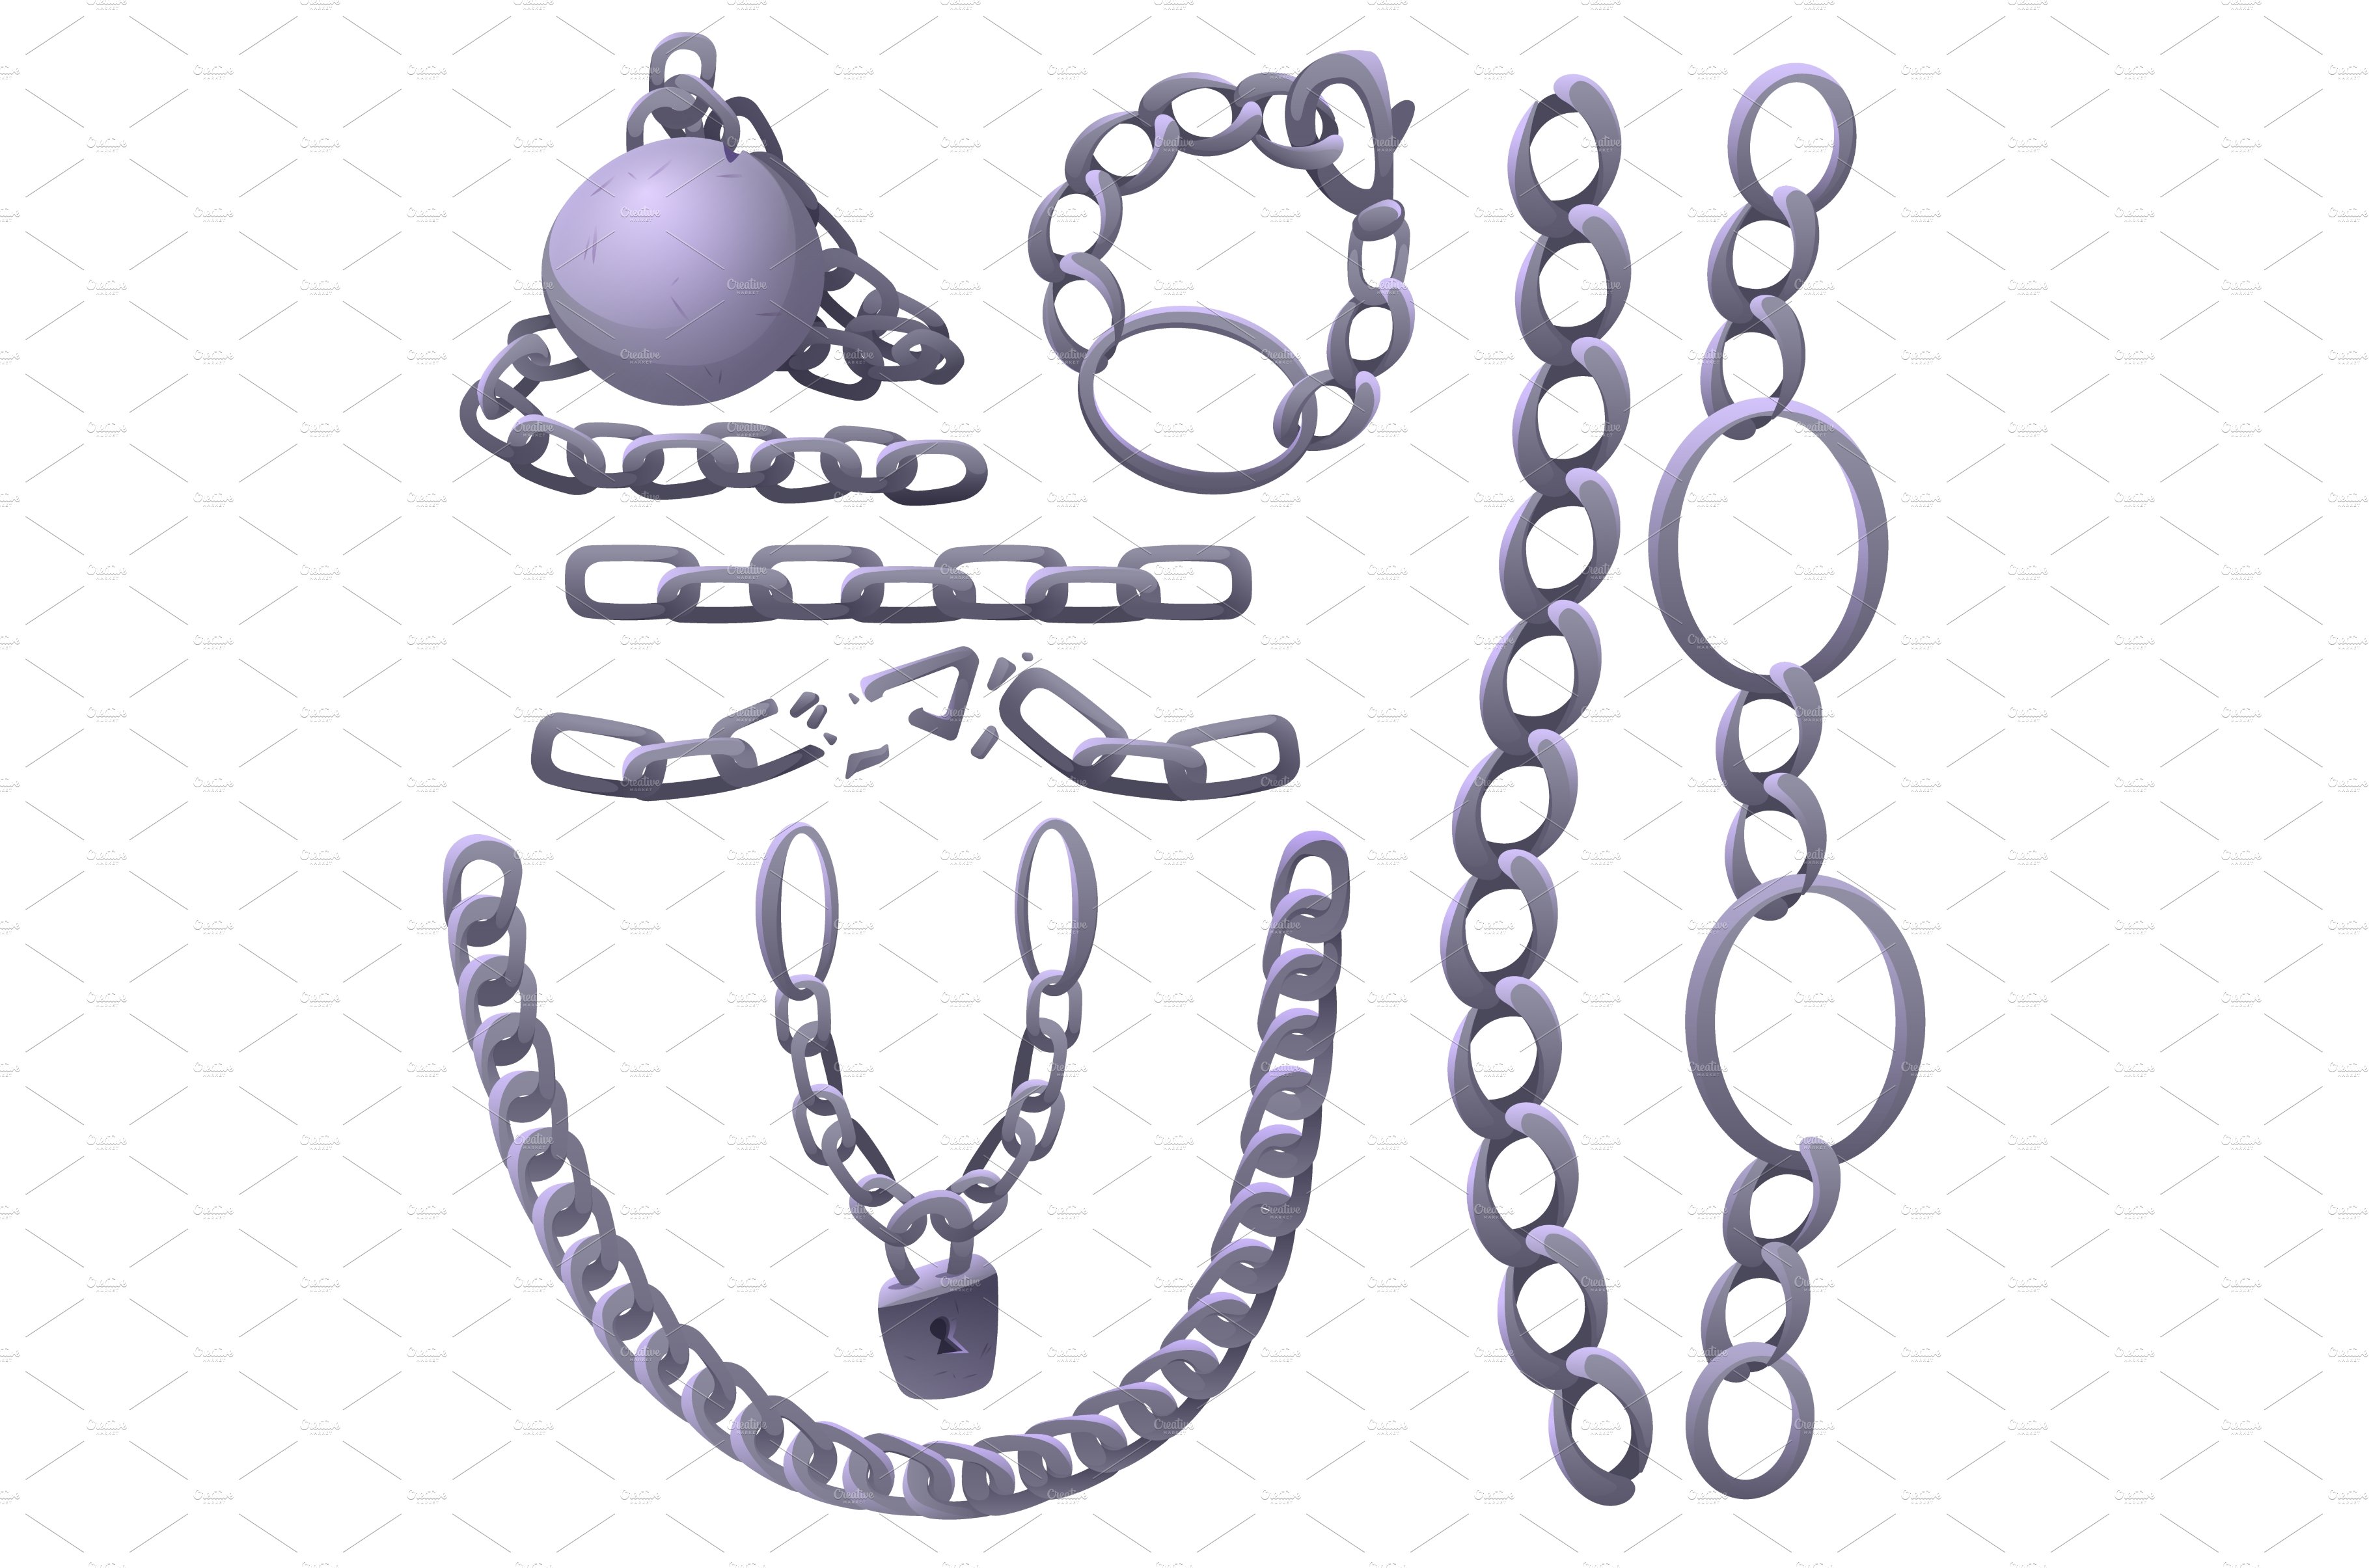 Metal chains with whole and broken cover image.